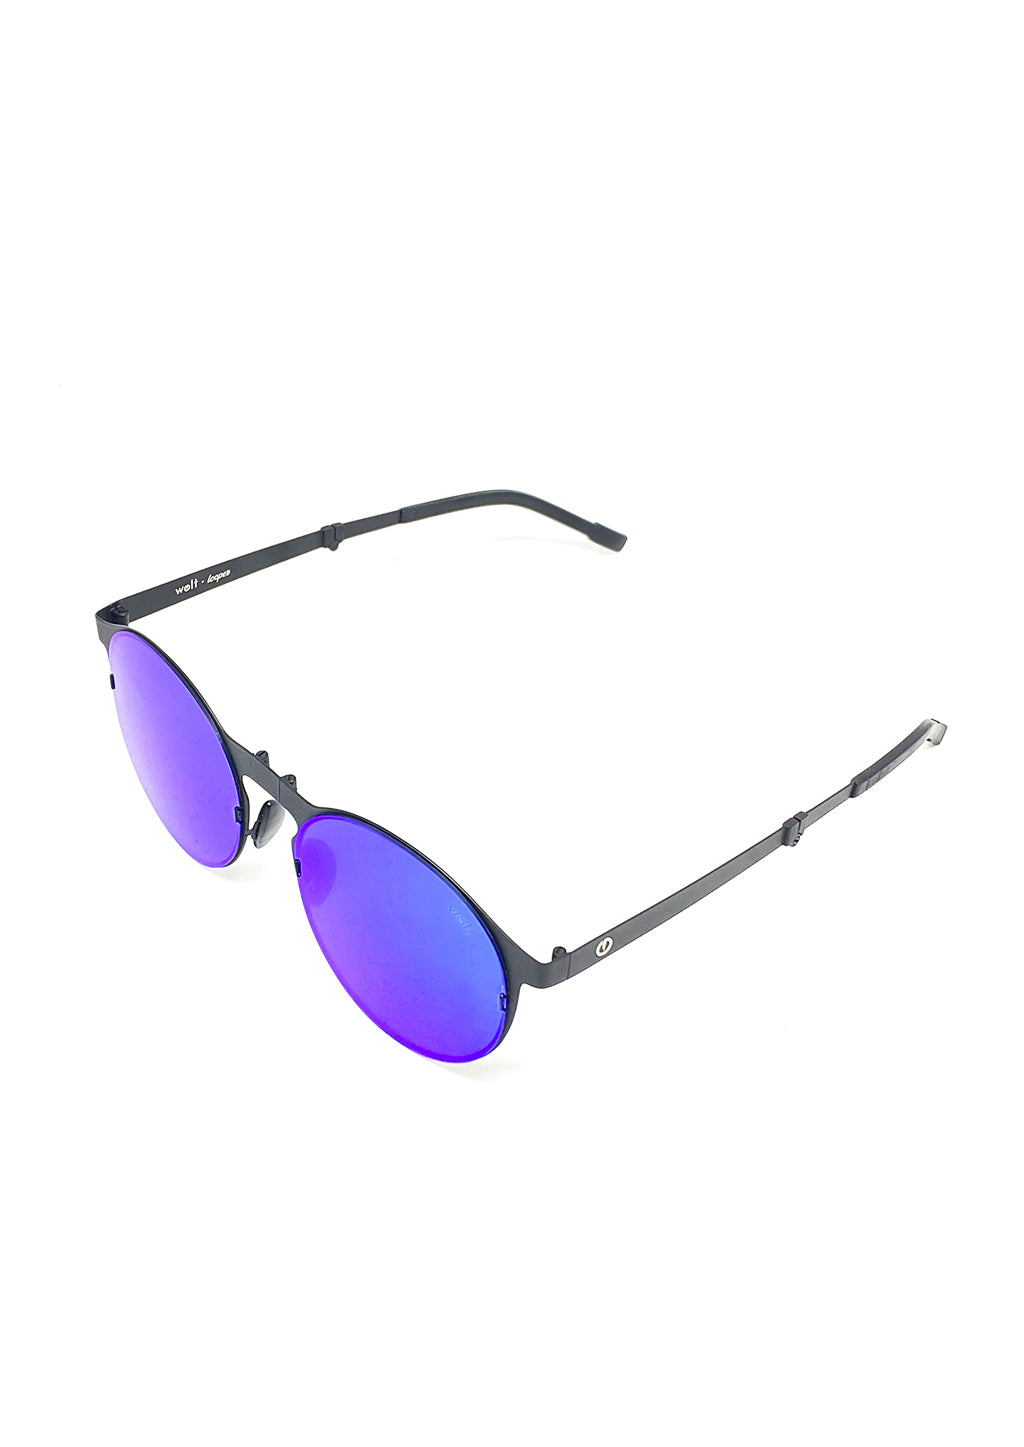 Foldable sunglasses - Looper classic round design - From upfront.